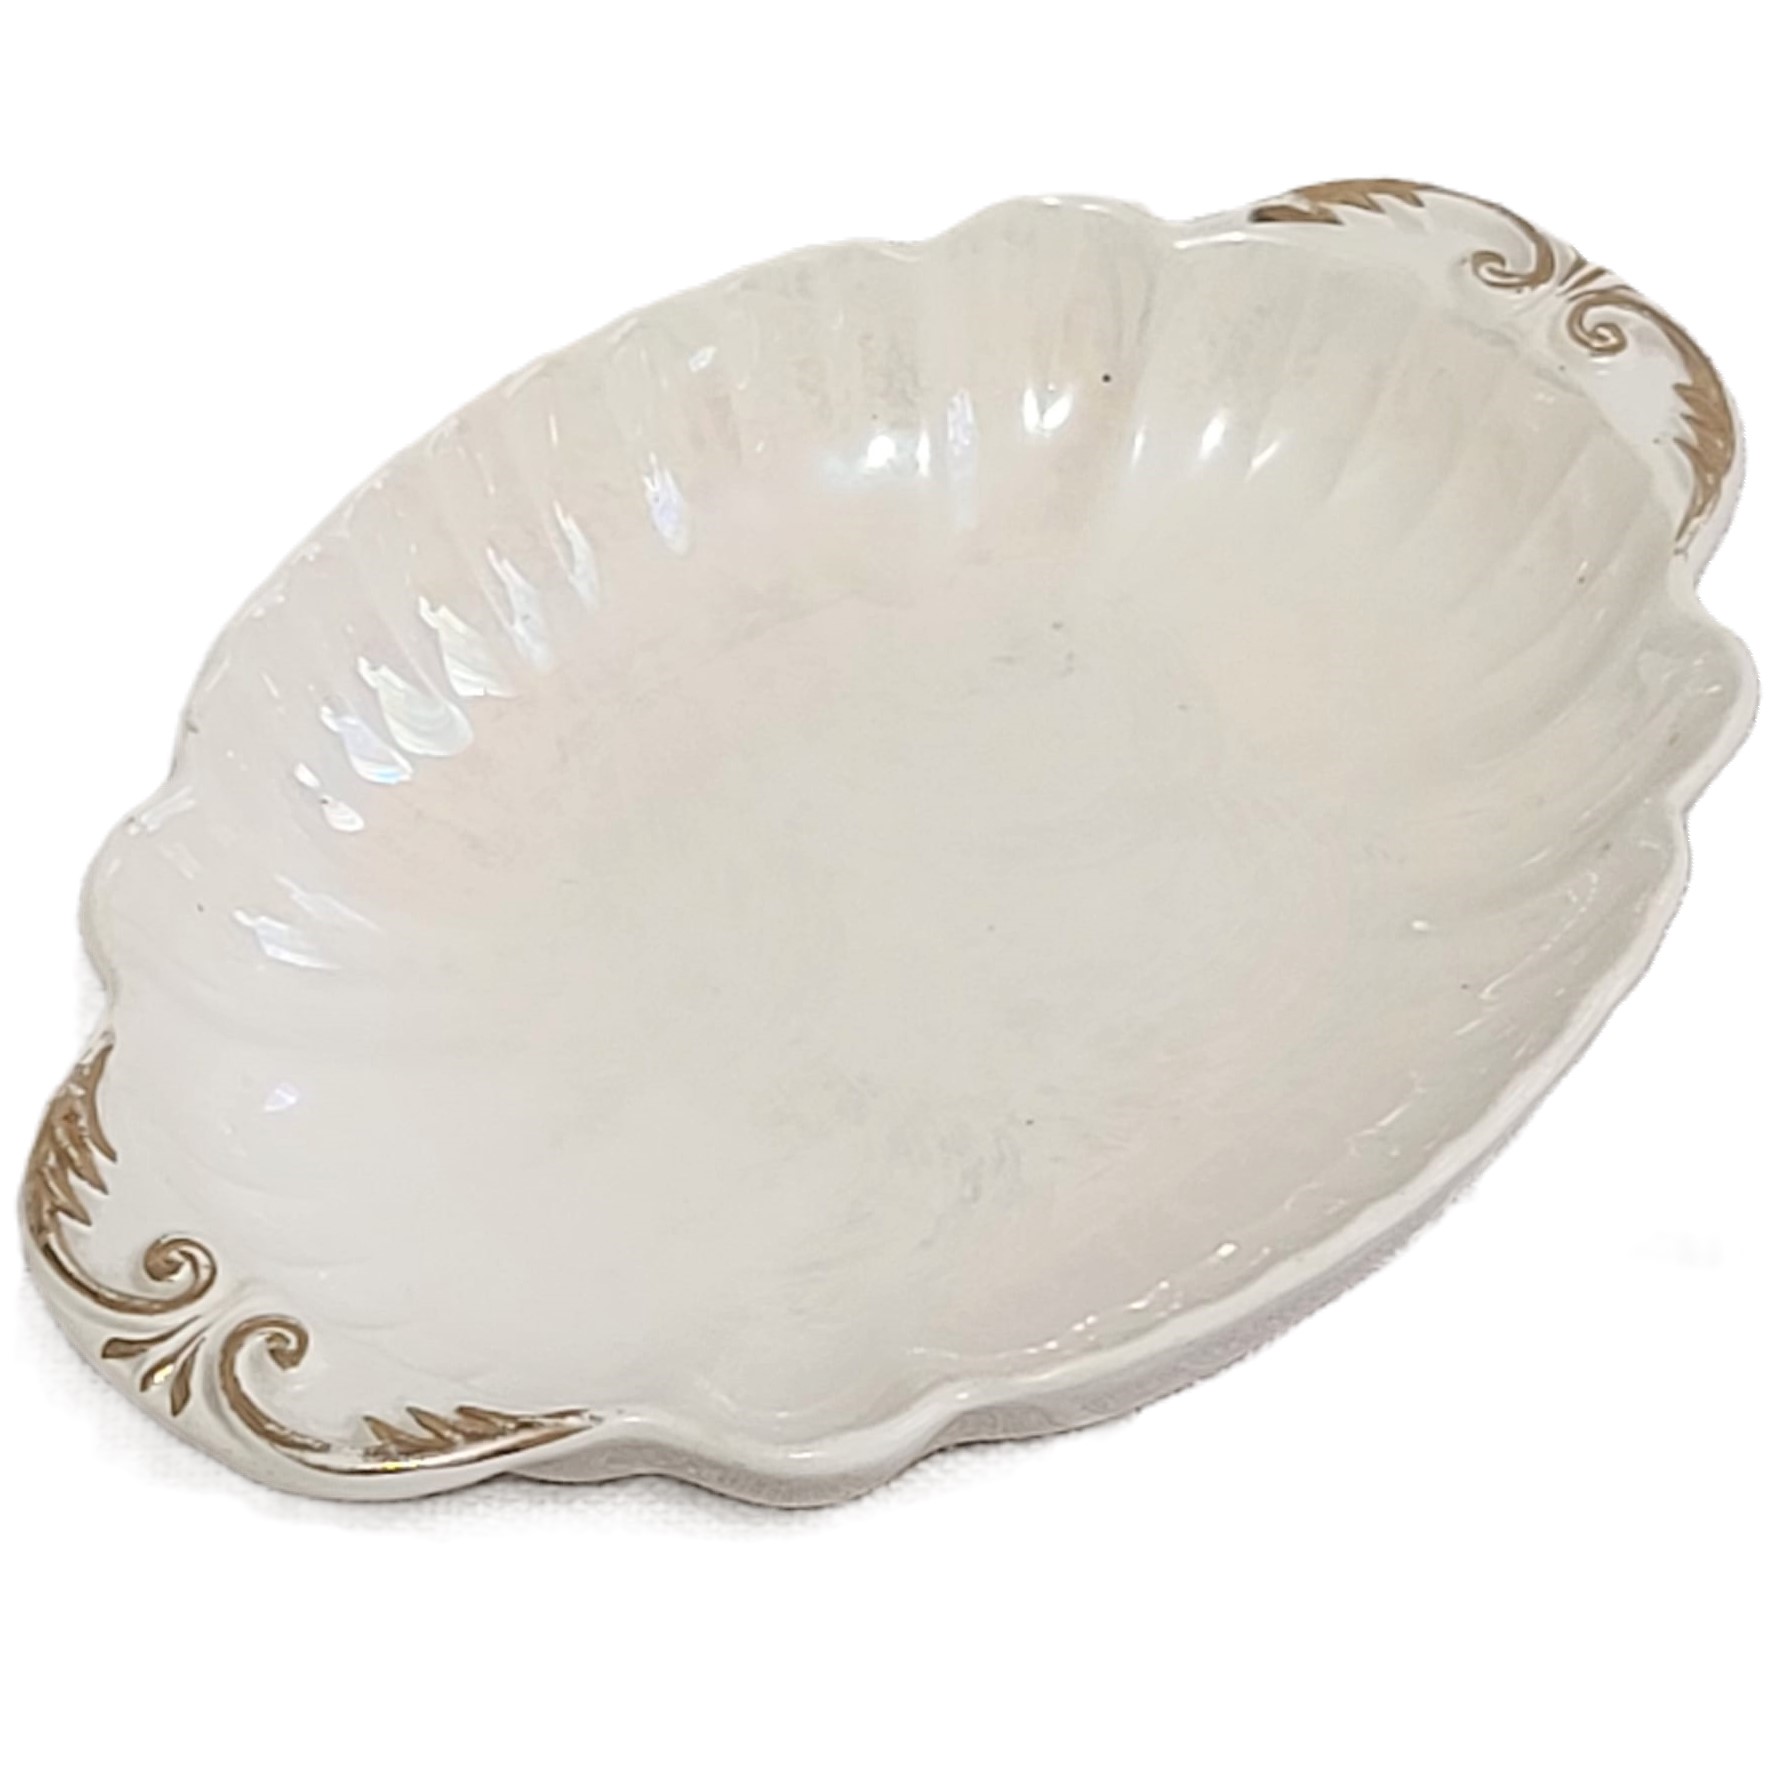 Pearlized Ivory Candy Dish Marked 24KT Gold